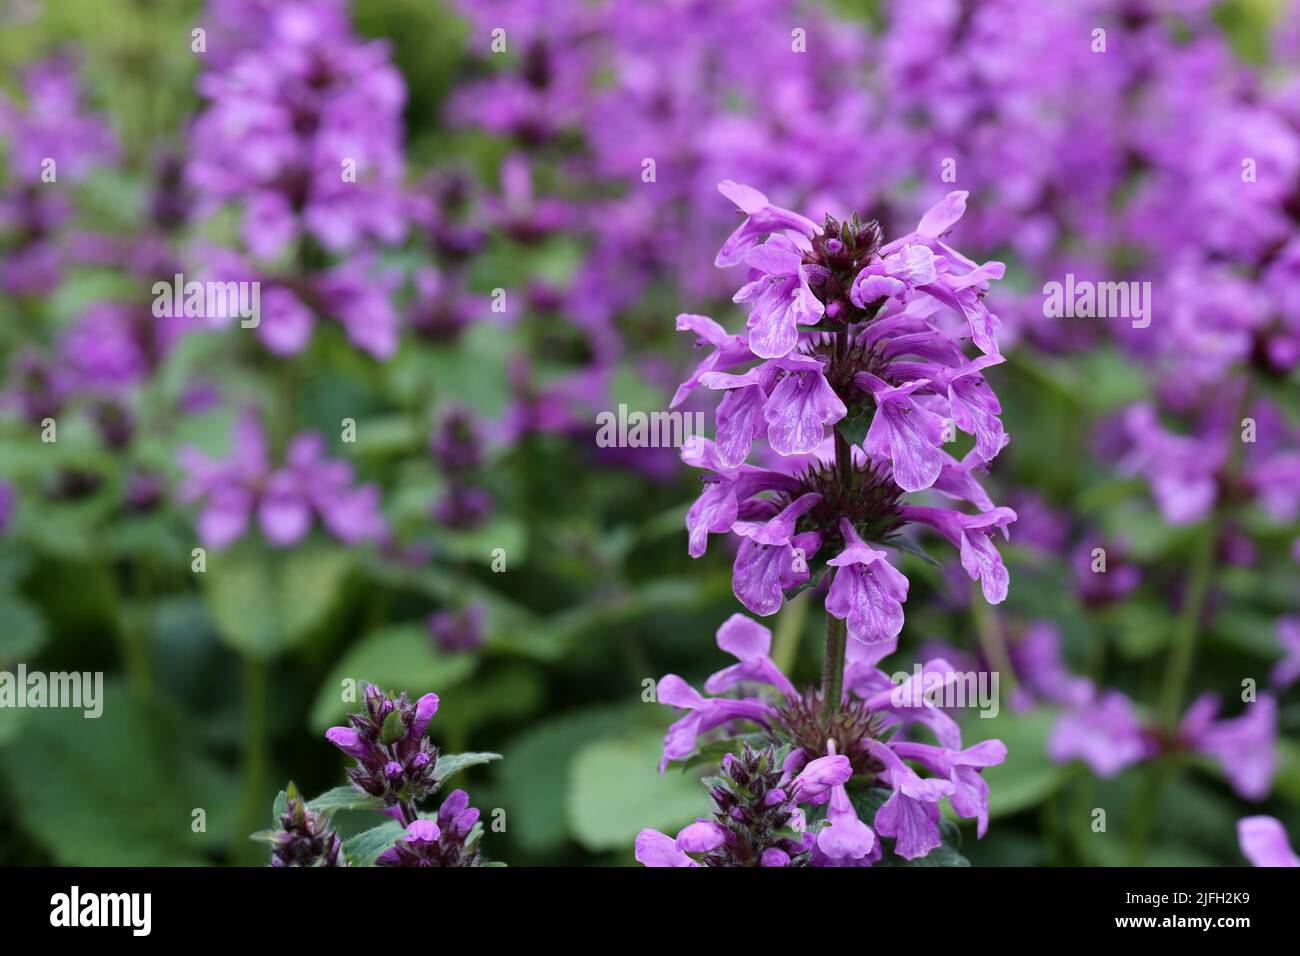 Plenty of purple colored flowers in a closeup with soft background. Beautiful summer themed color image. Stock Photo